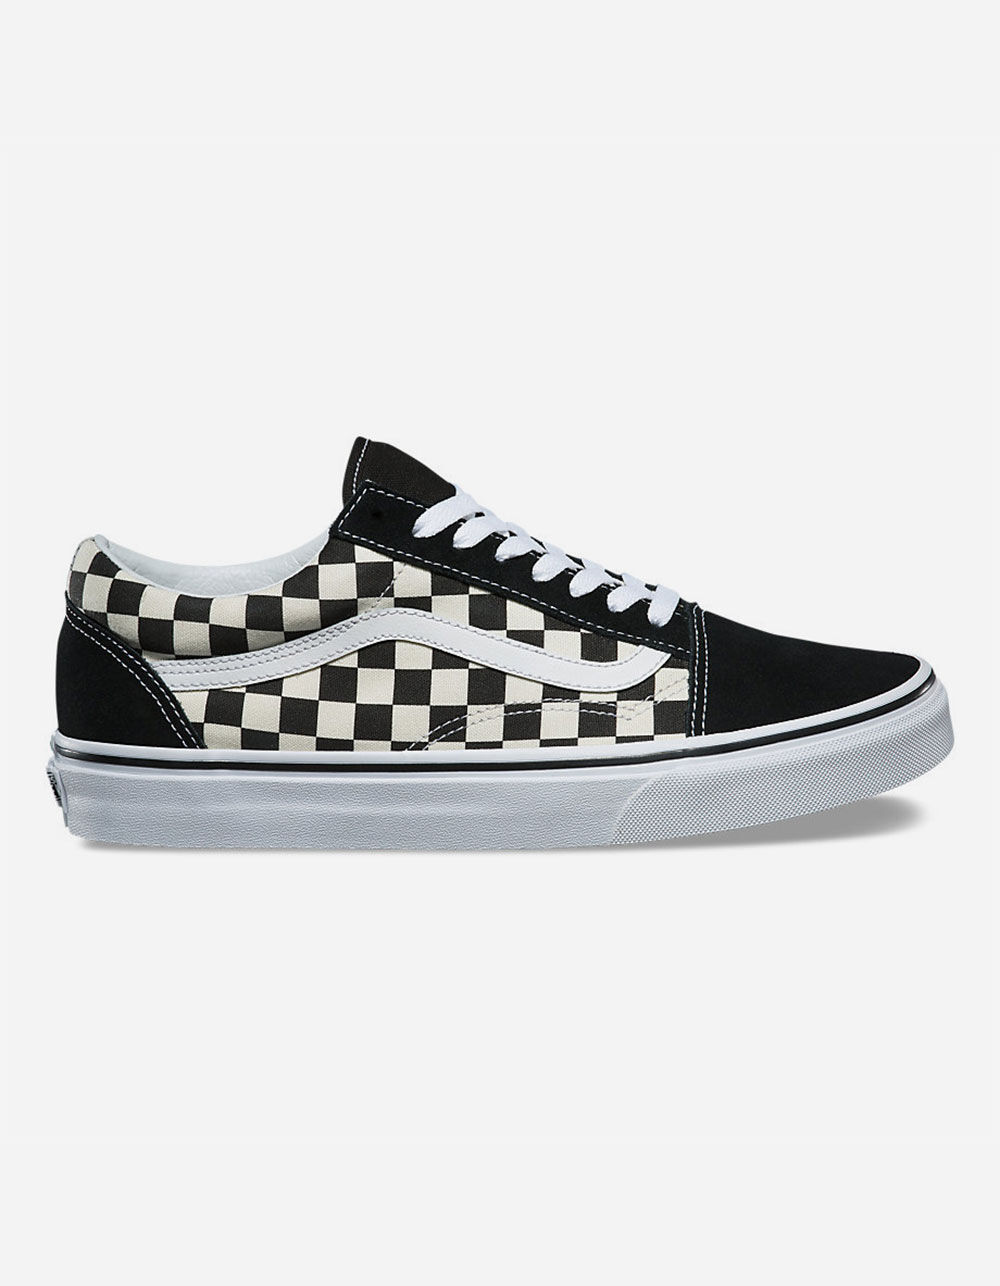 Black and white checkered board  Custom vans shoes, Vans shoes